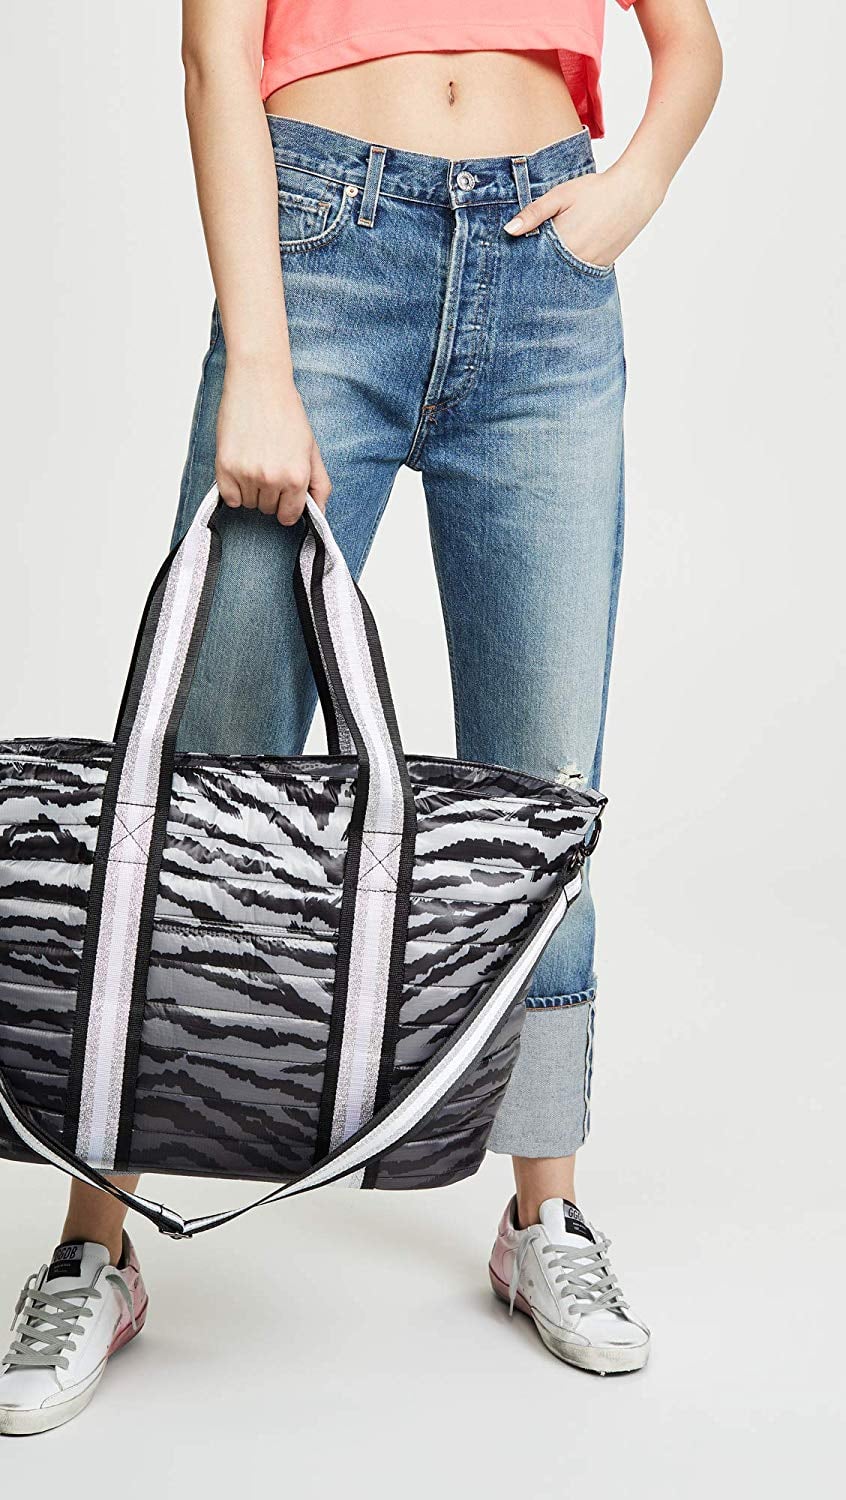 Think Royln Wingman Bag, 9 Adorable Bags You'll Be Carrying This Season,  All From  and Under $100